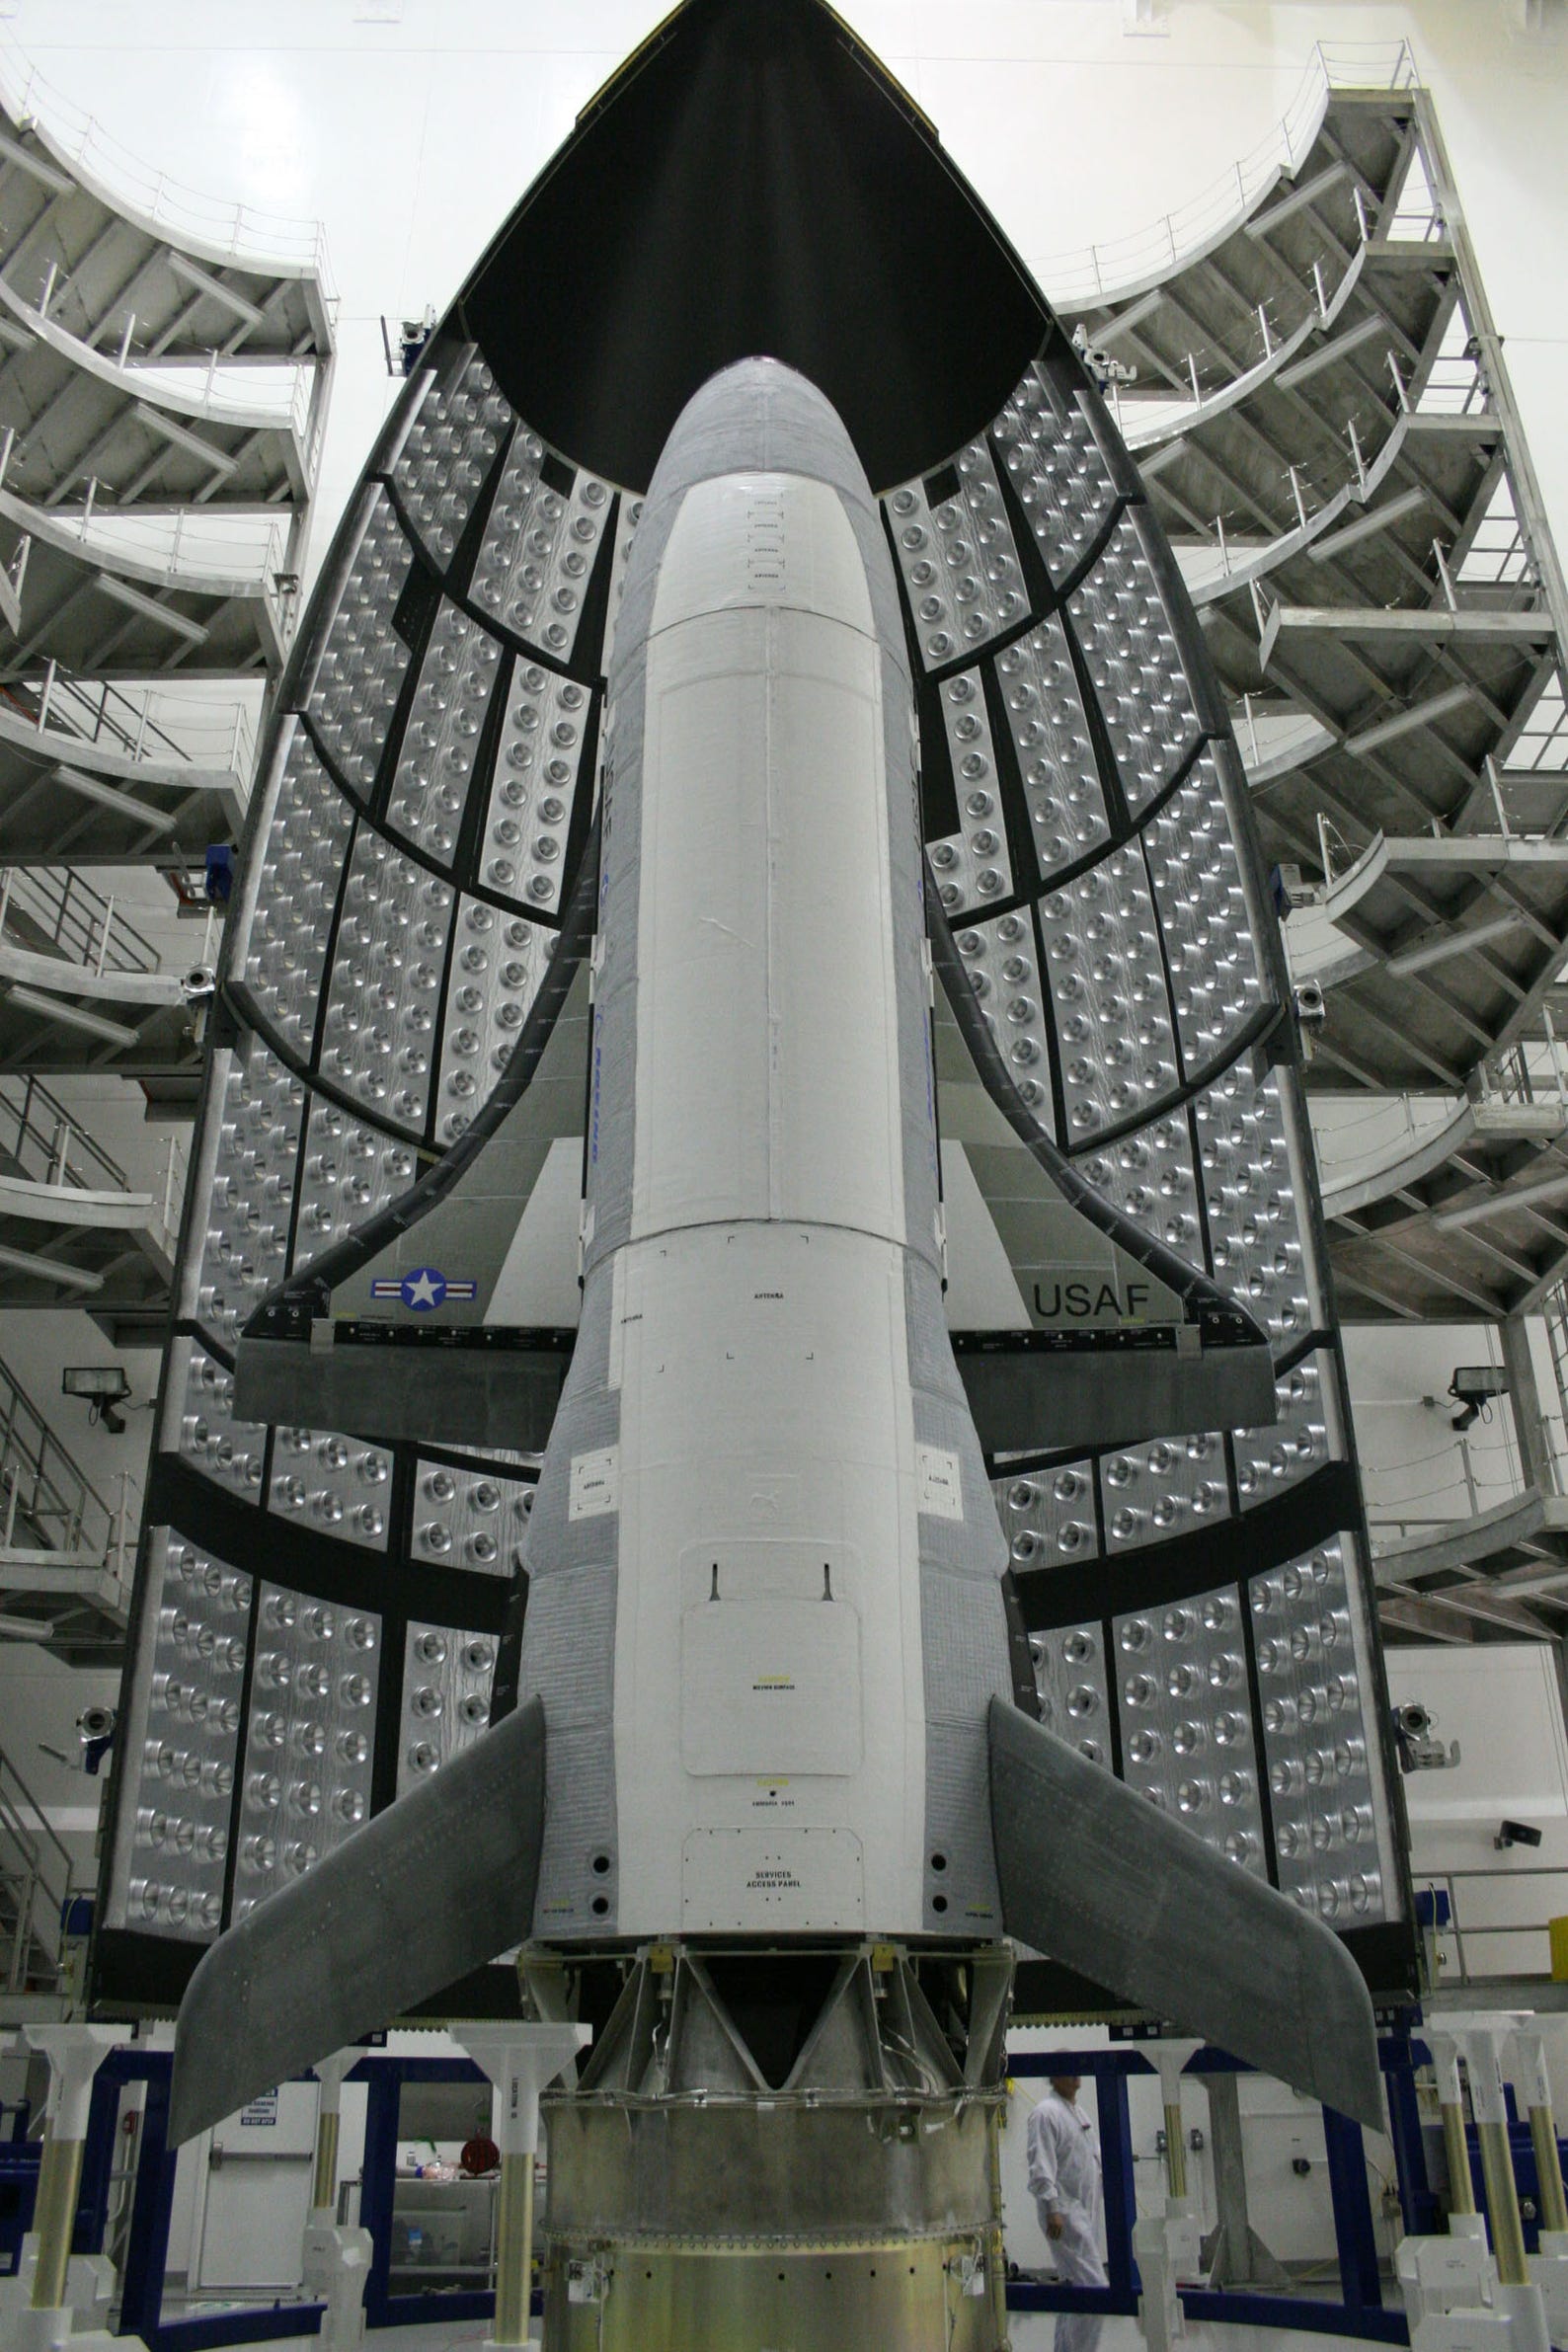 The X-37B Orbital Test Vehicle at the Astrotech facility in Titusville, Fla. April 5, 2010.